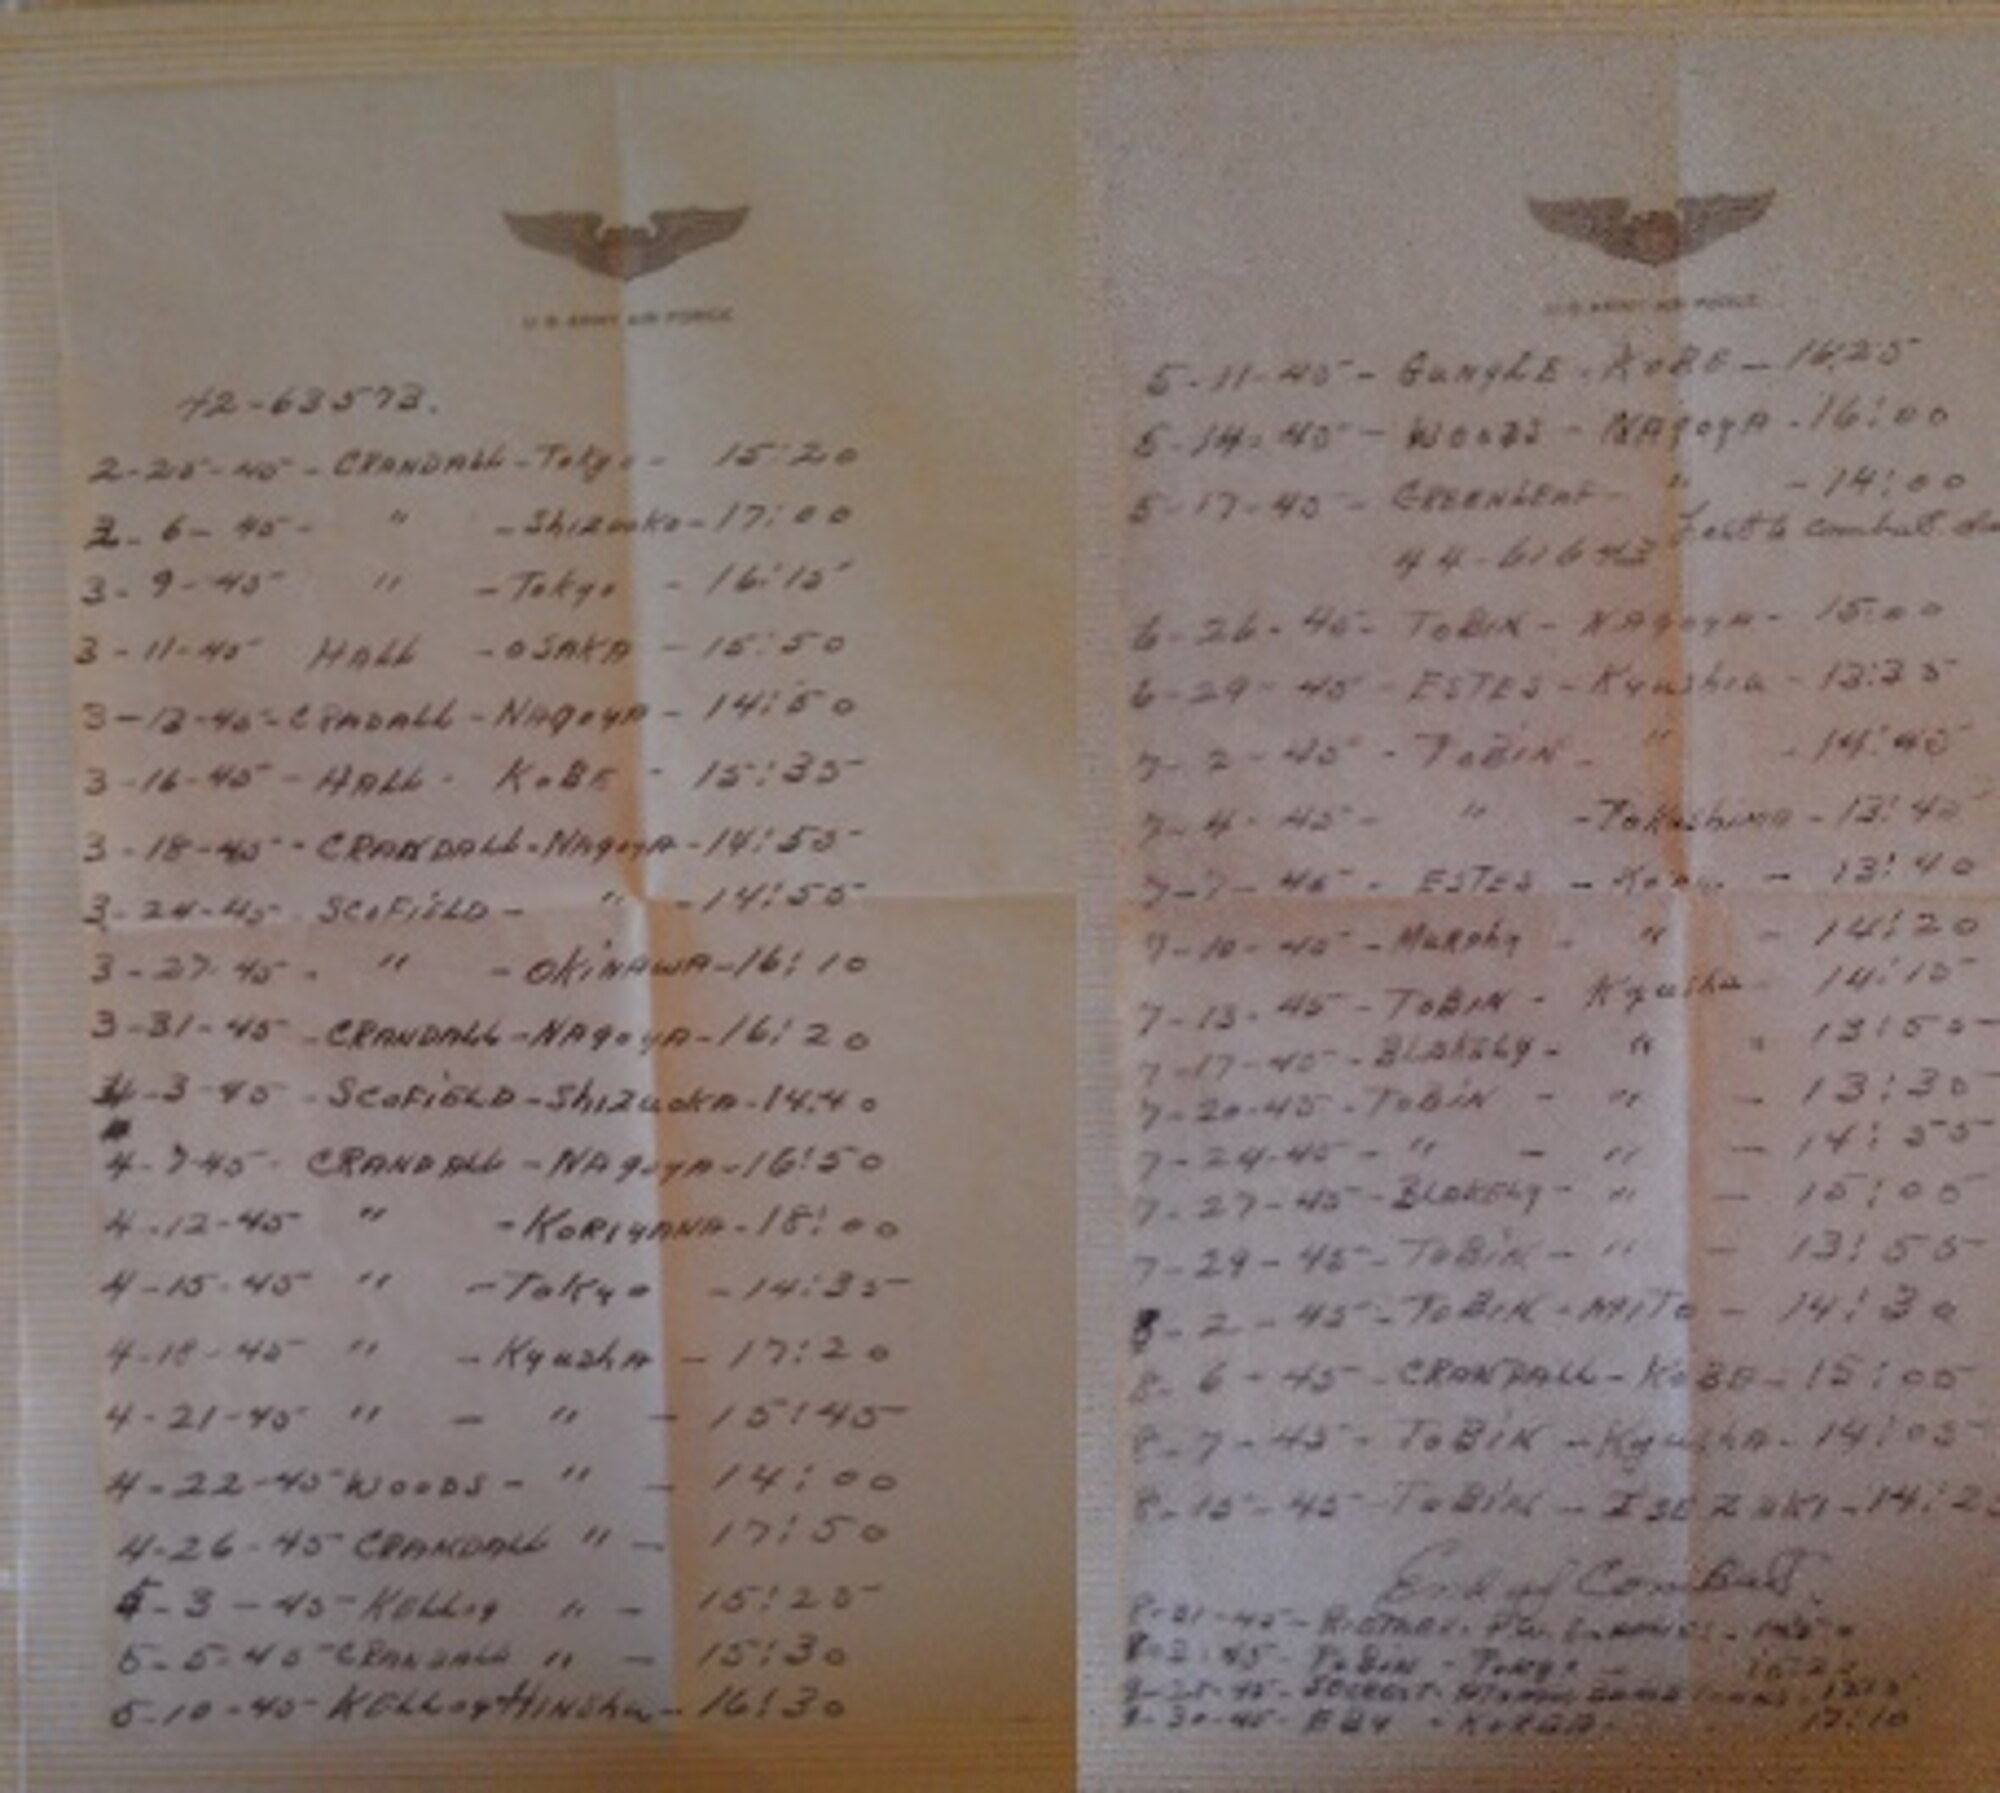 A log of the bombing operations.